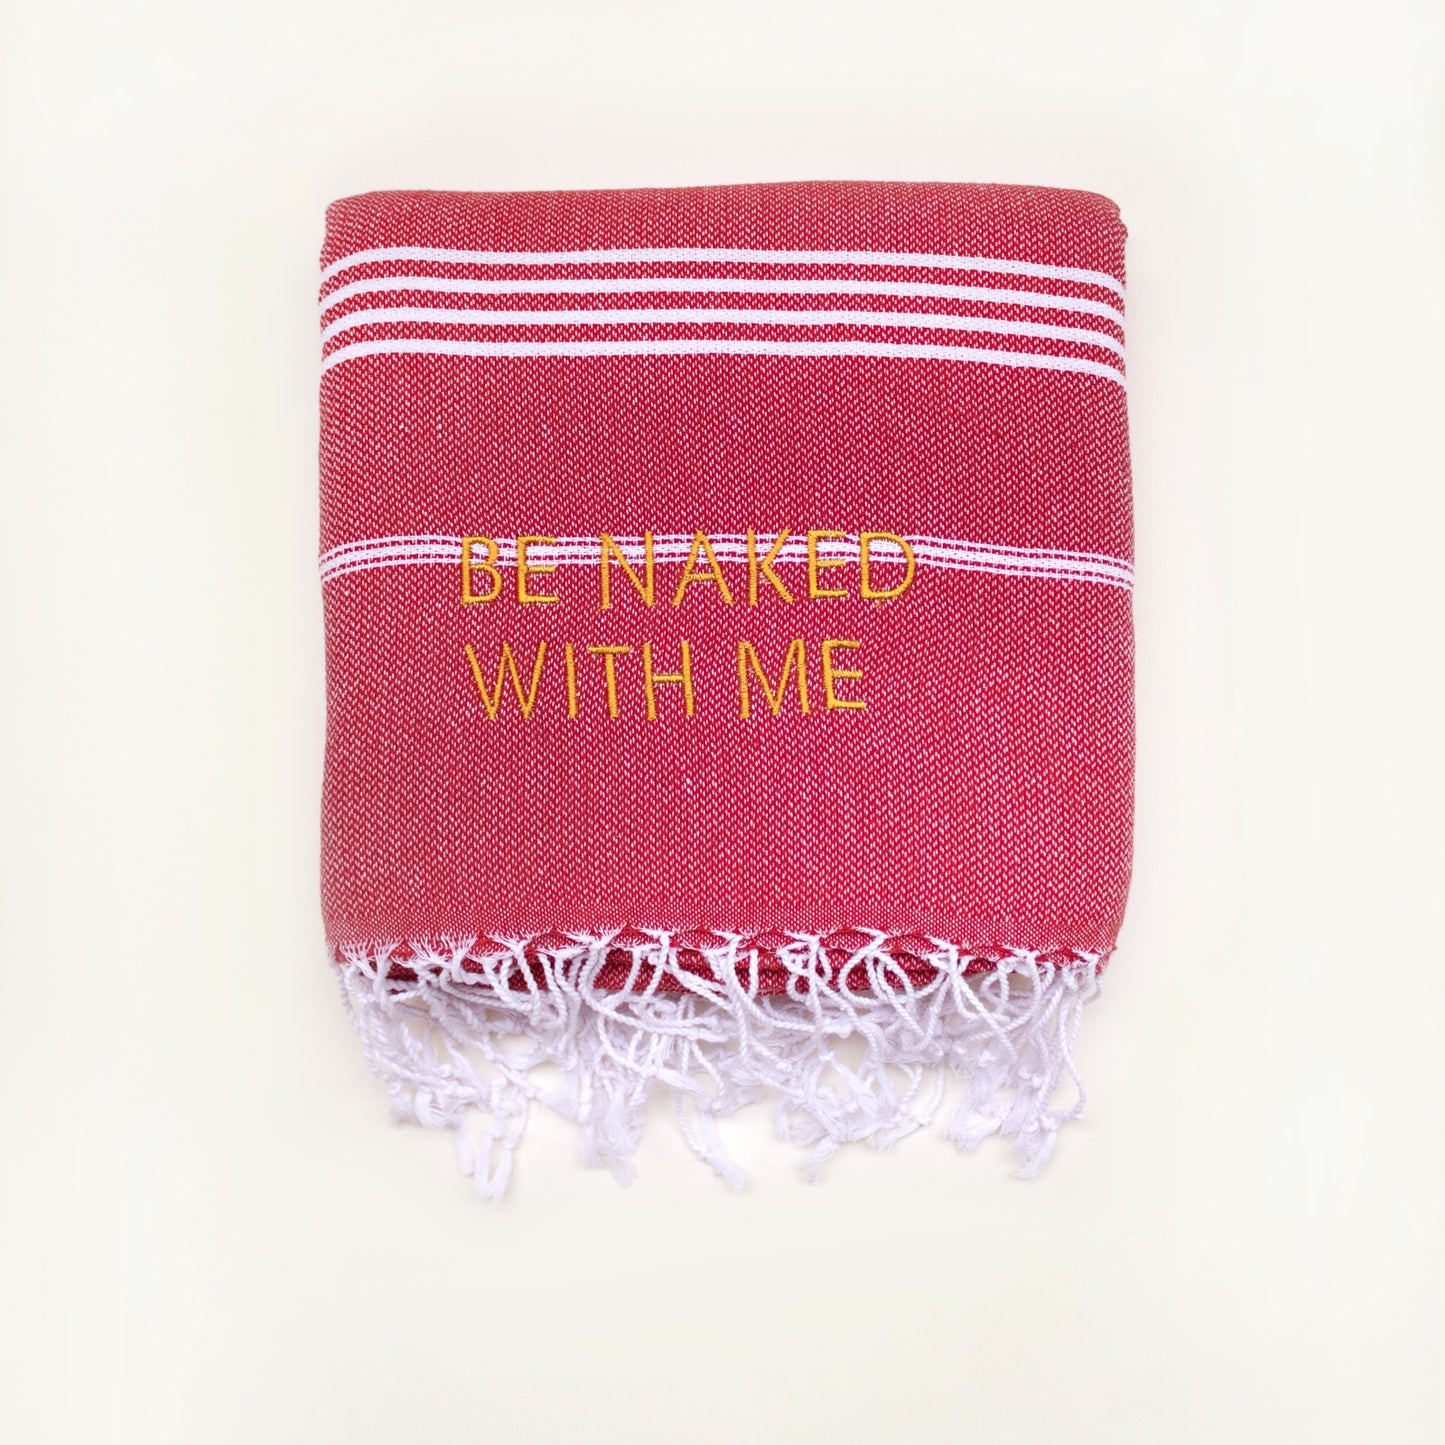 "BE NAKED WITH ME" Embroidered Turkish Towel